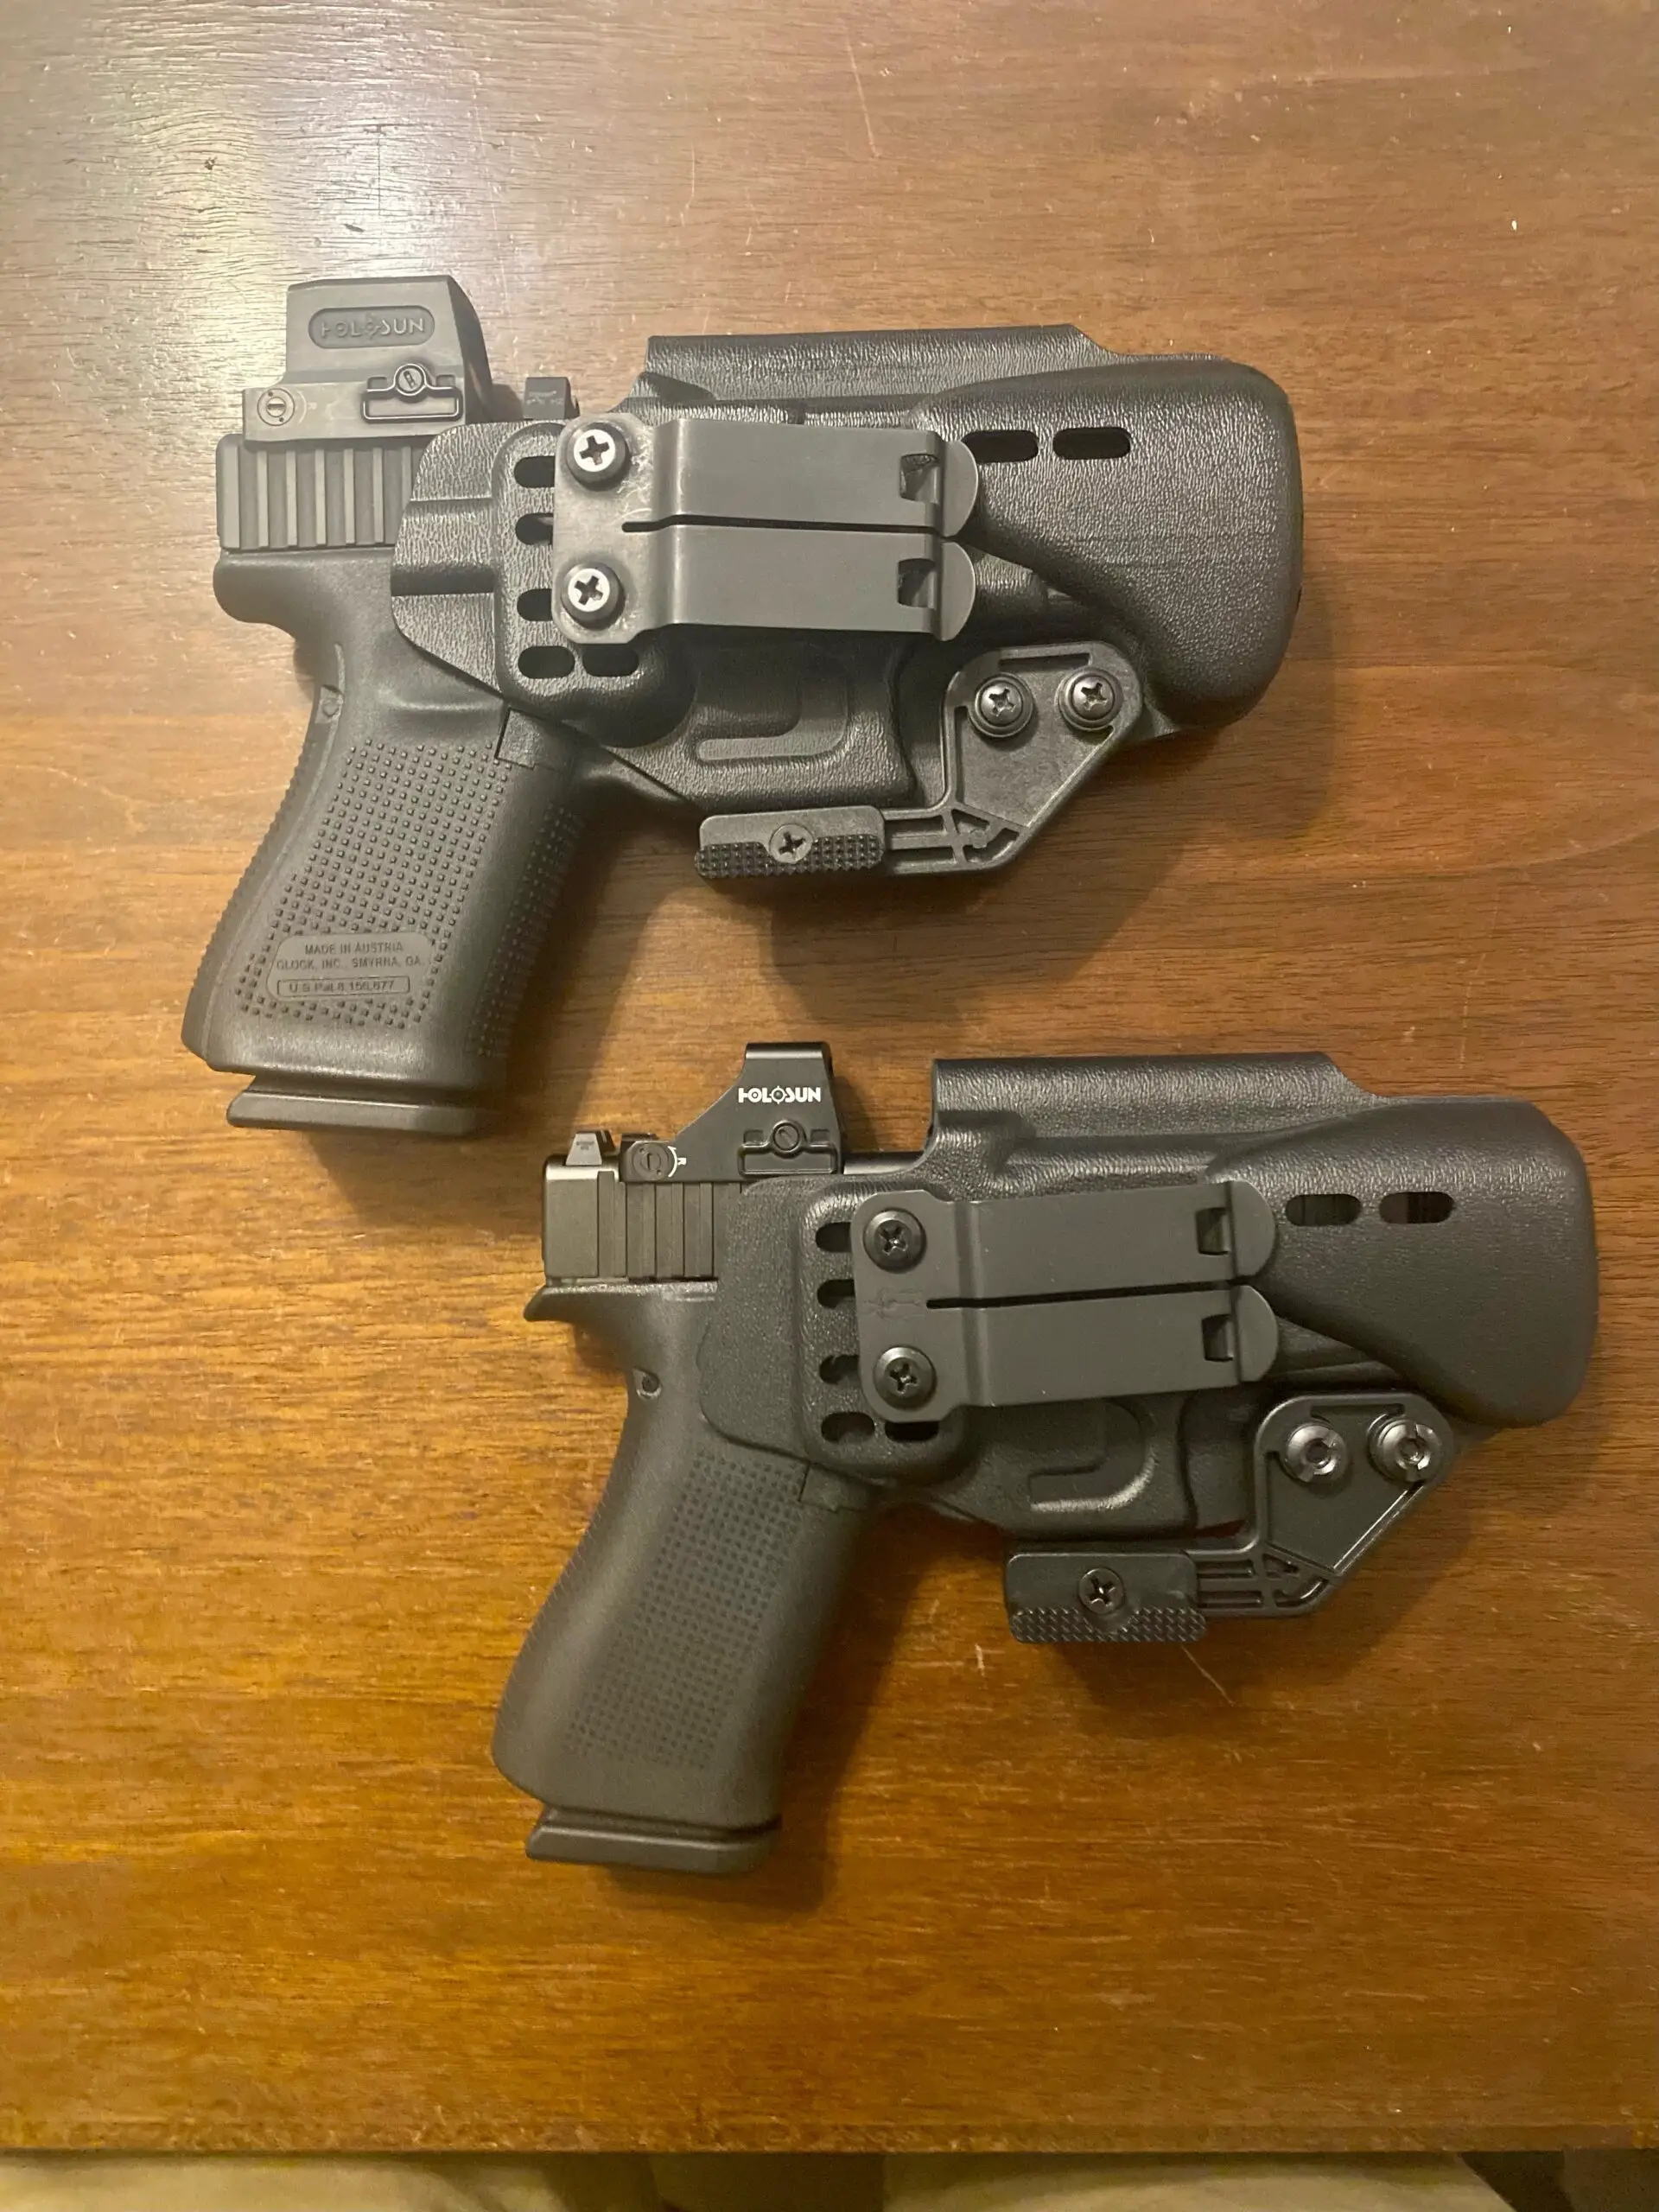 PHLster Pro Holster with Glock 19 and Glock 43X